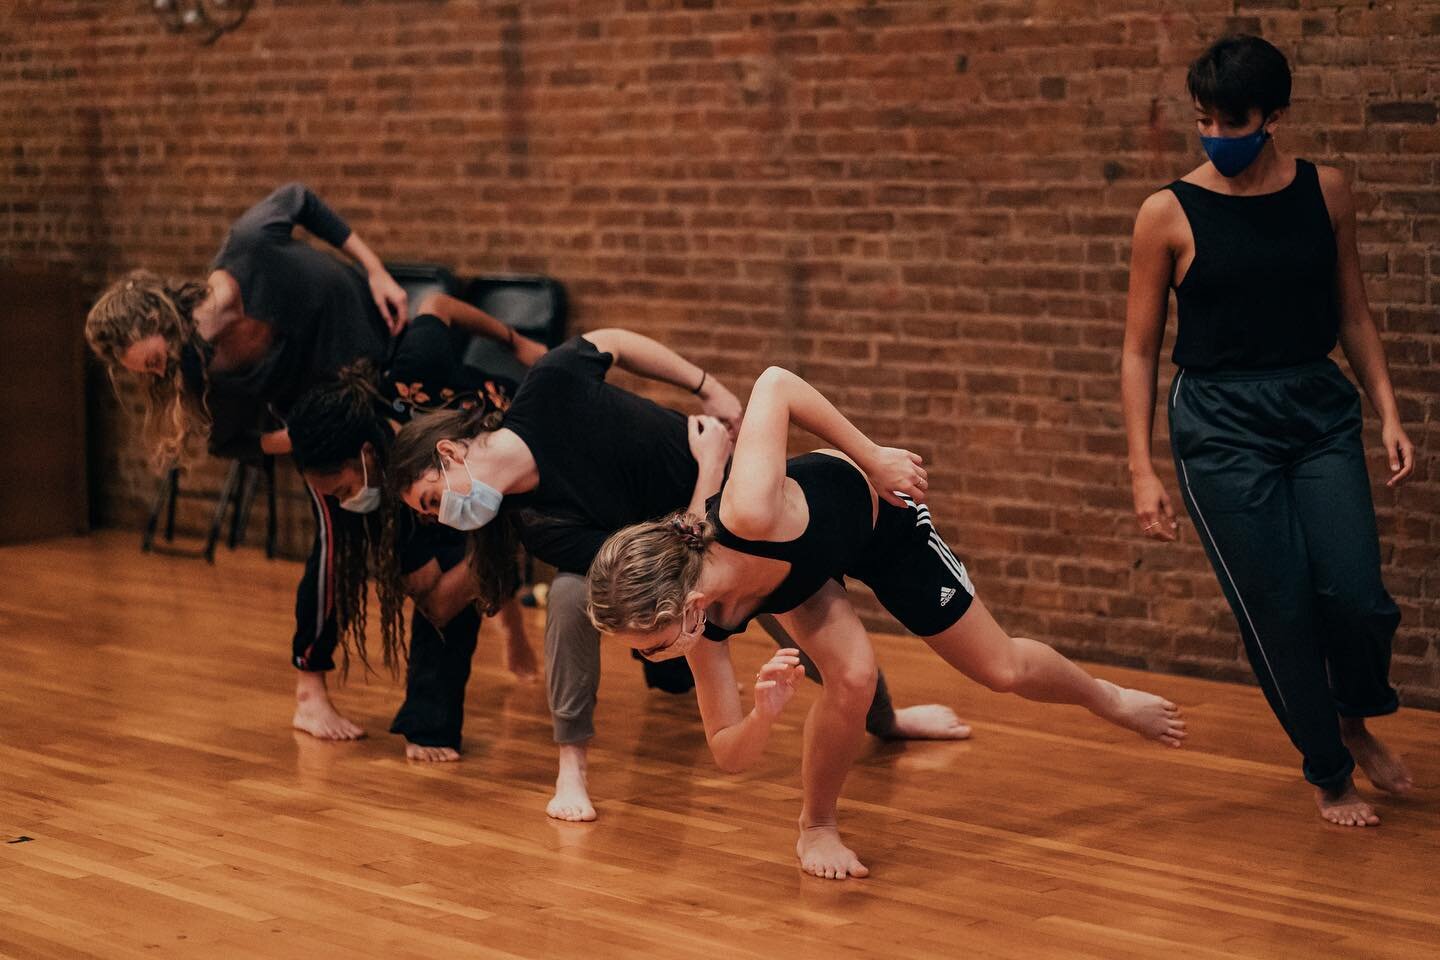 Heart soaring in residency with @soluqdancetheater
Beyond grateful for every second of studio time we get these days 
Thank you @artsonsite
📷:@becca.vision